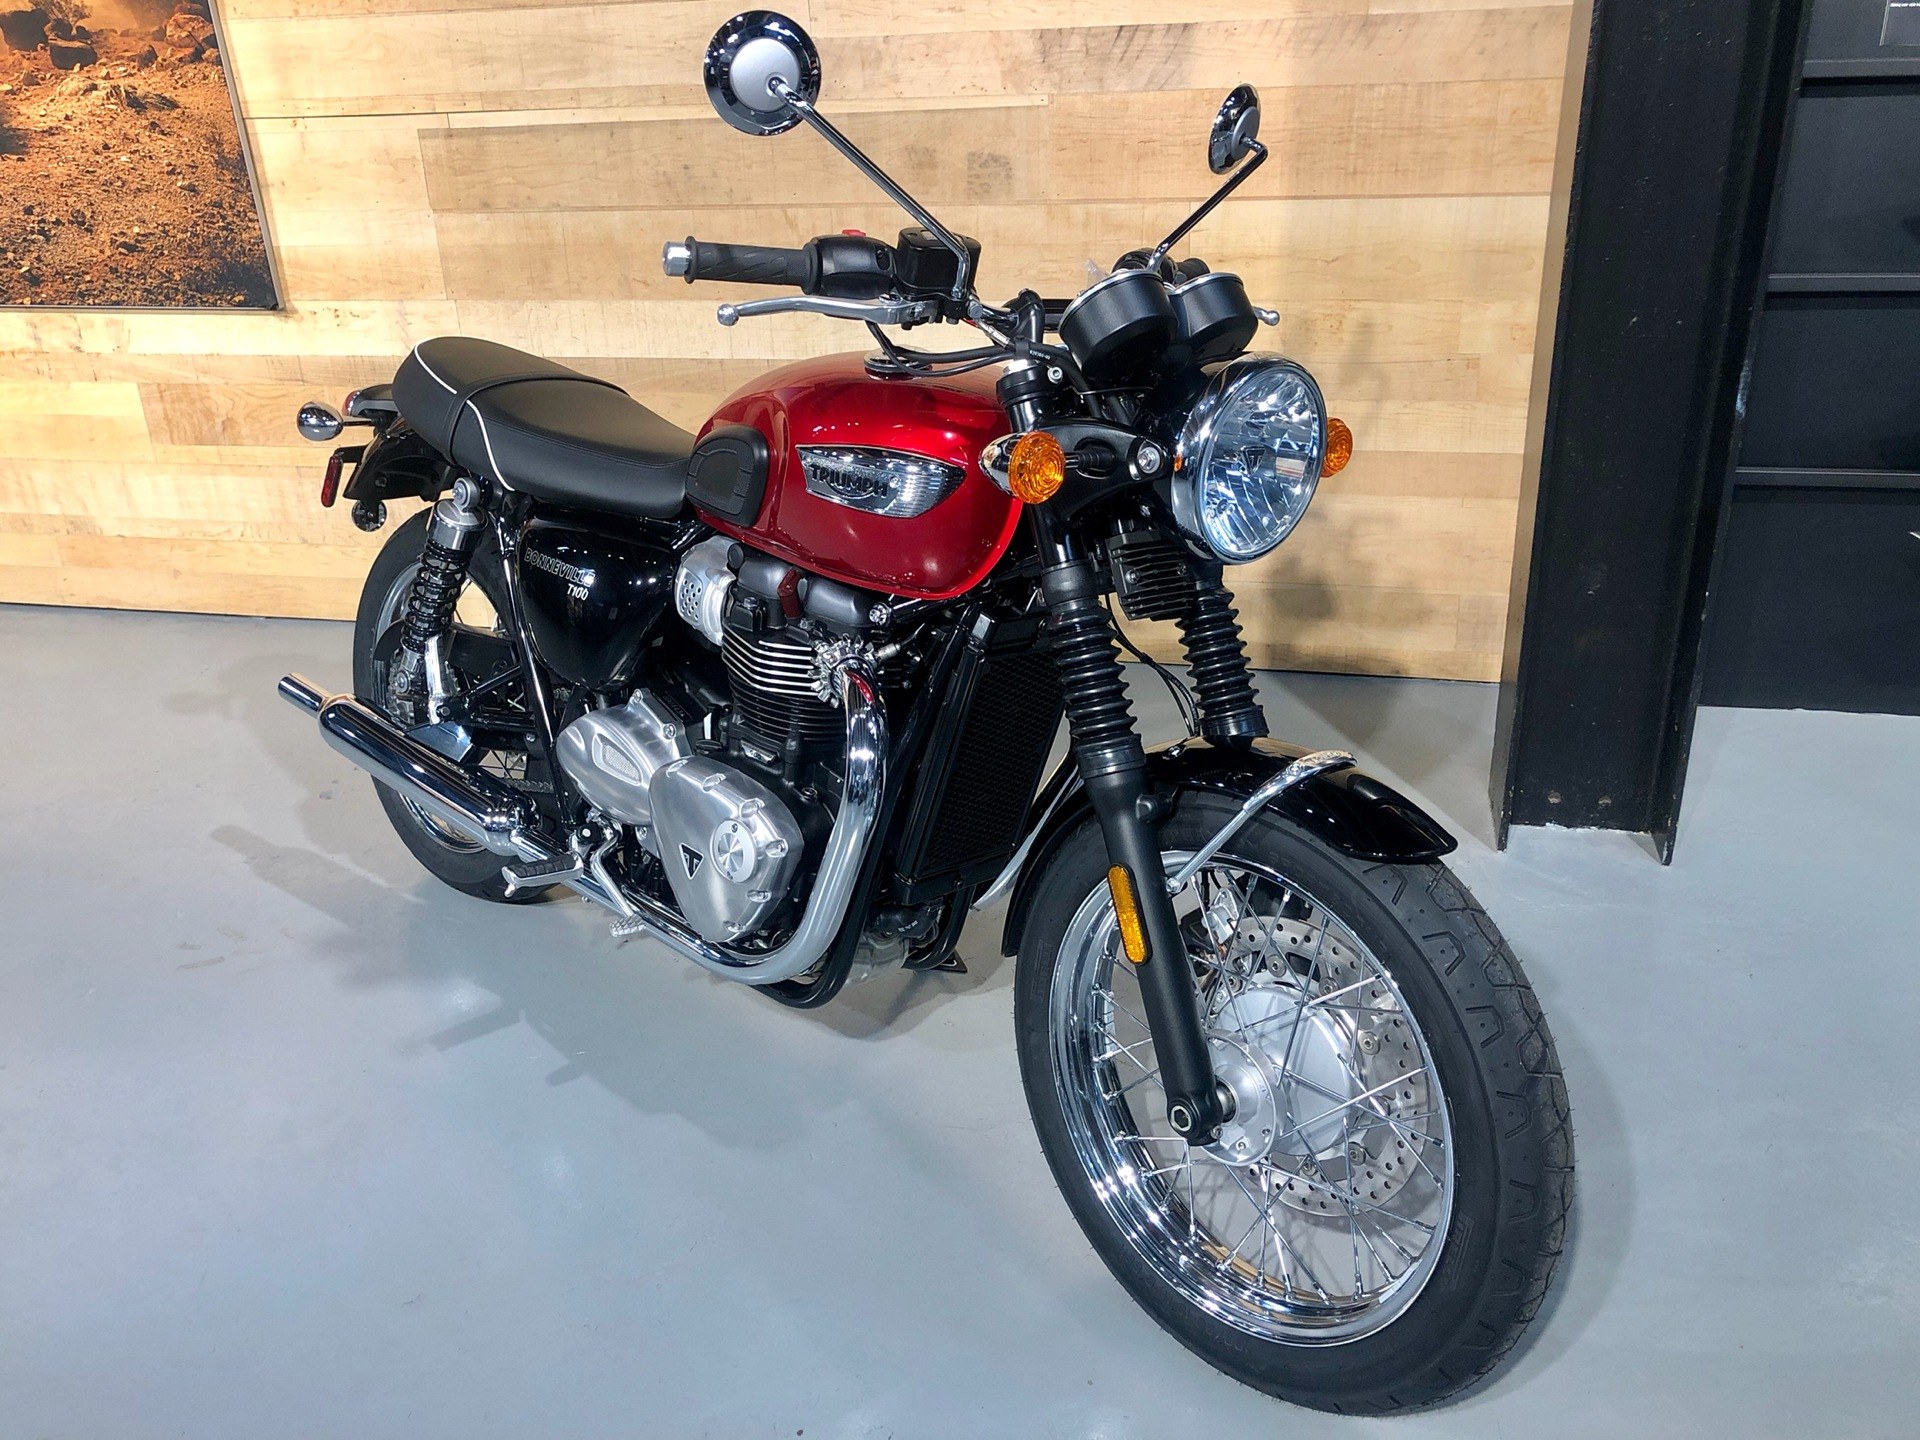 New 2020 Triumph Bonneville T100 Motorcycles in Enfield, CT | Stock